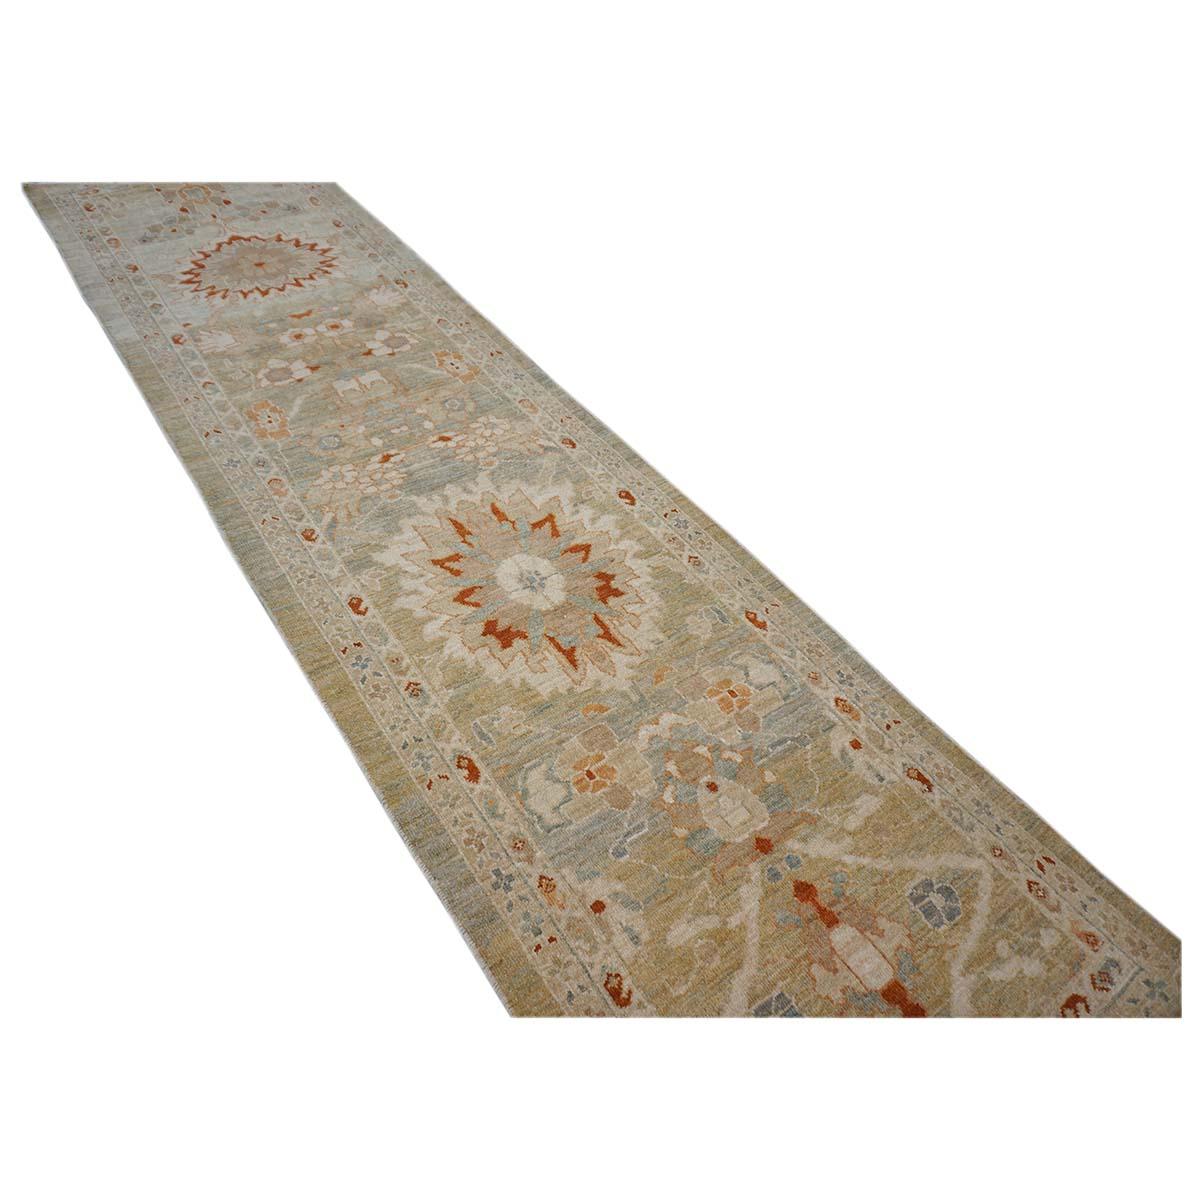 21st Century Sultanabad Master 3x12 Khaki, Rust, & Slate Hallway Runner Rug In Excellent Condition For Sale In Houston, TX